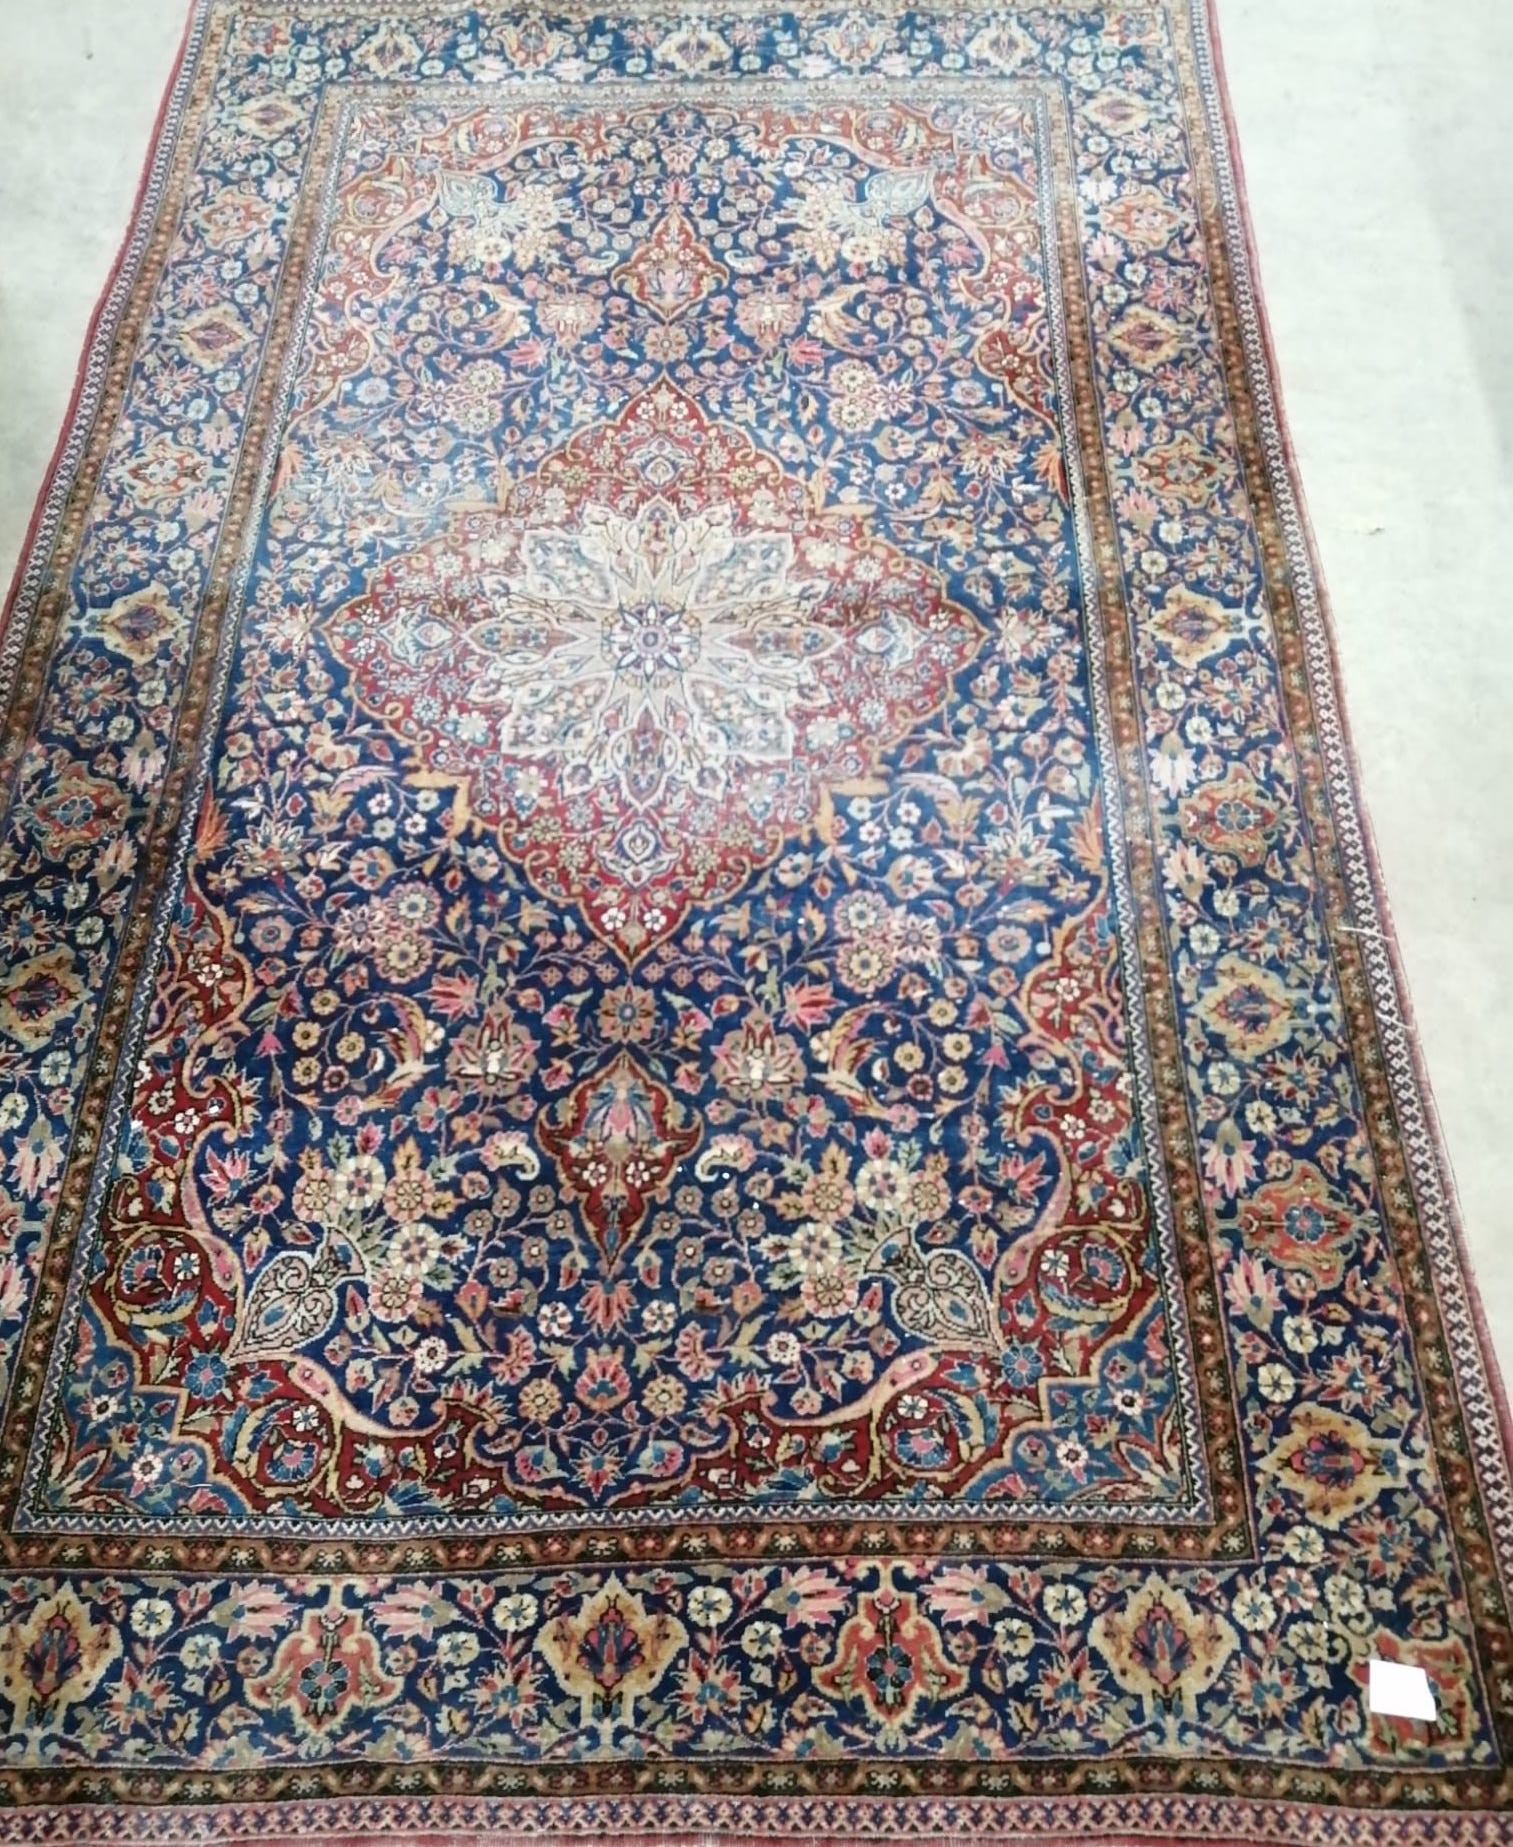 A pair of early 20th century Kashan blue ground rugs, 200 x 128cm (worn)